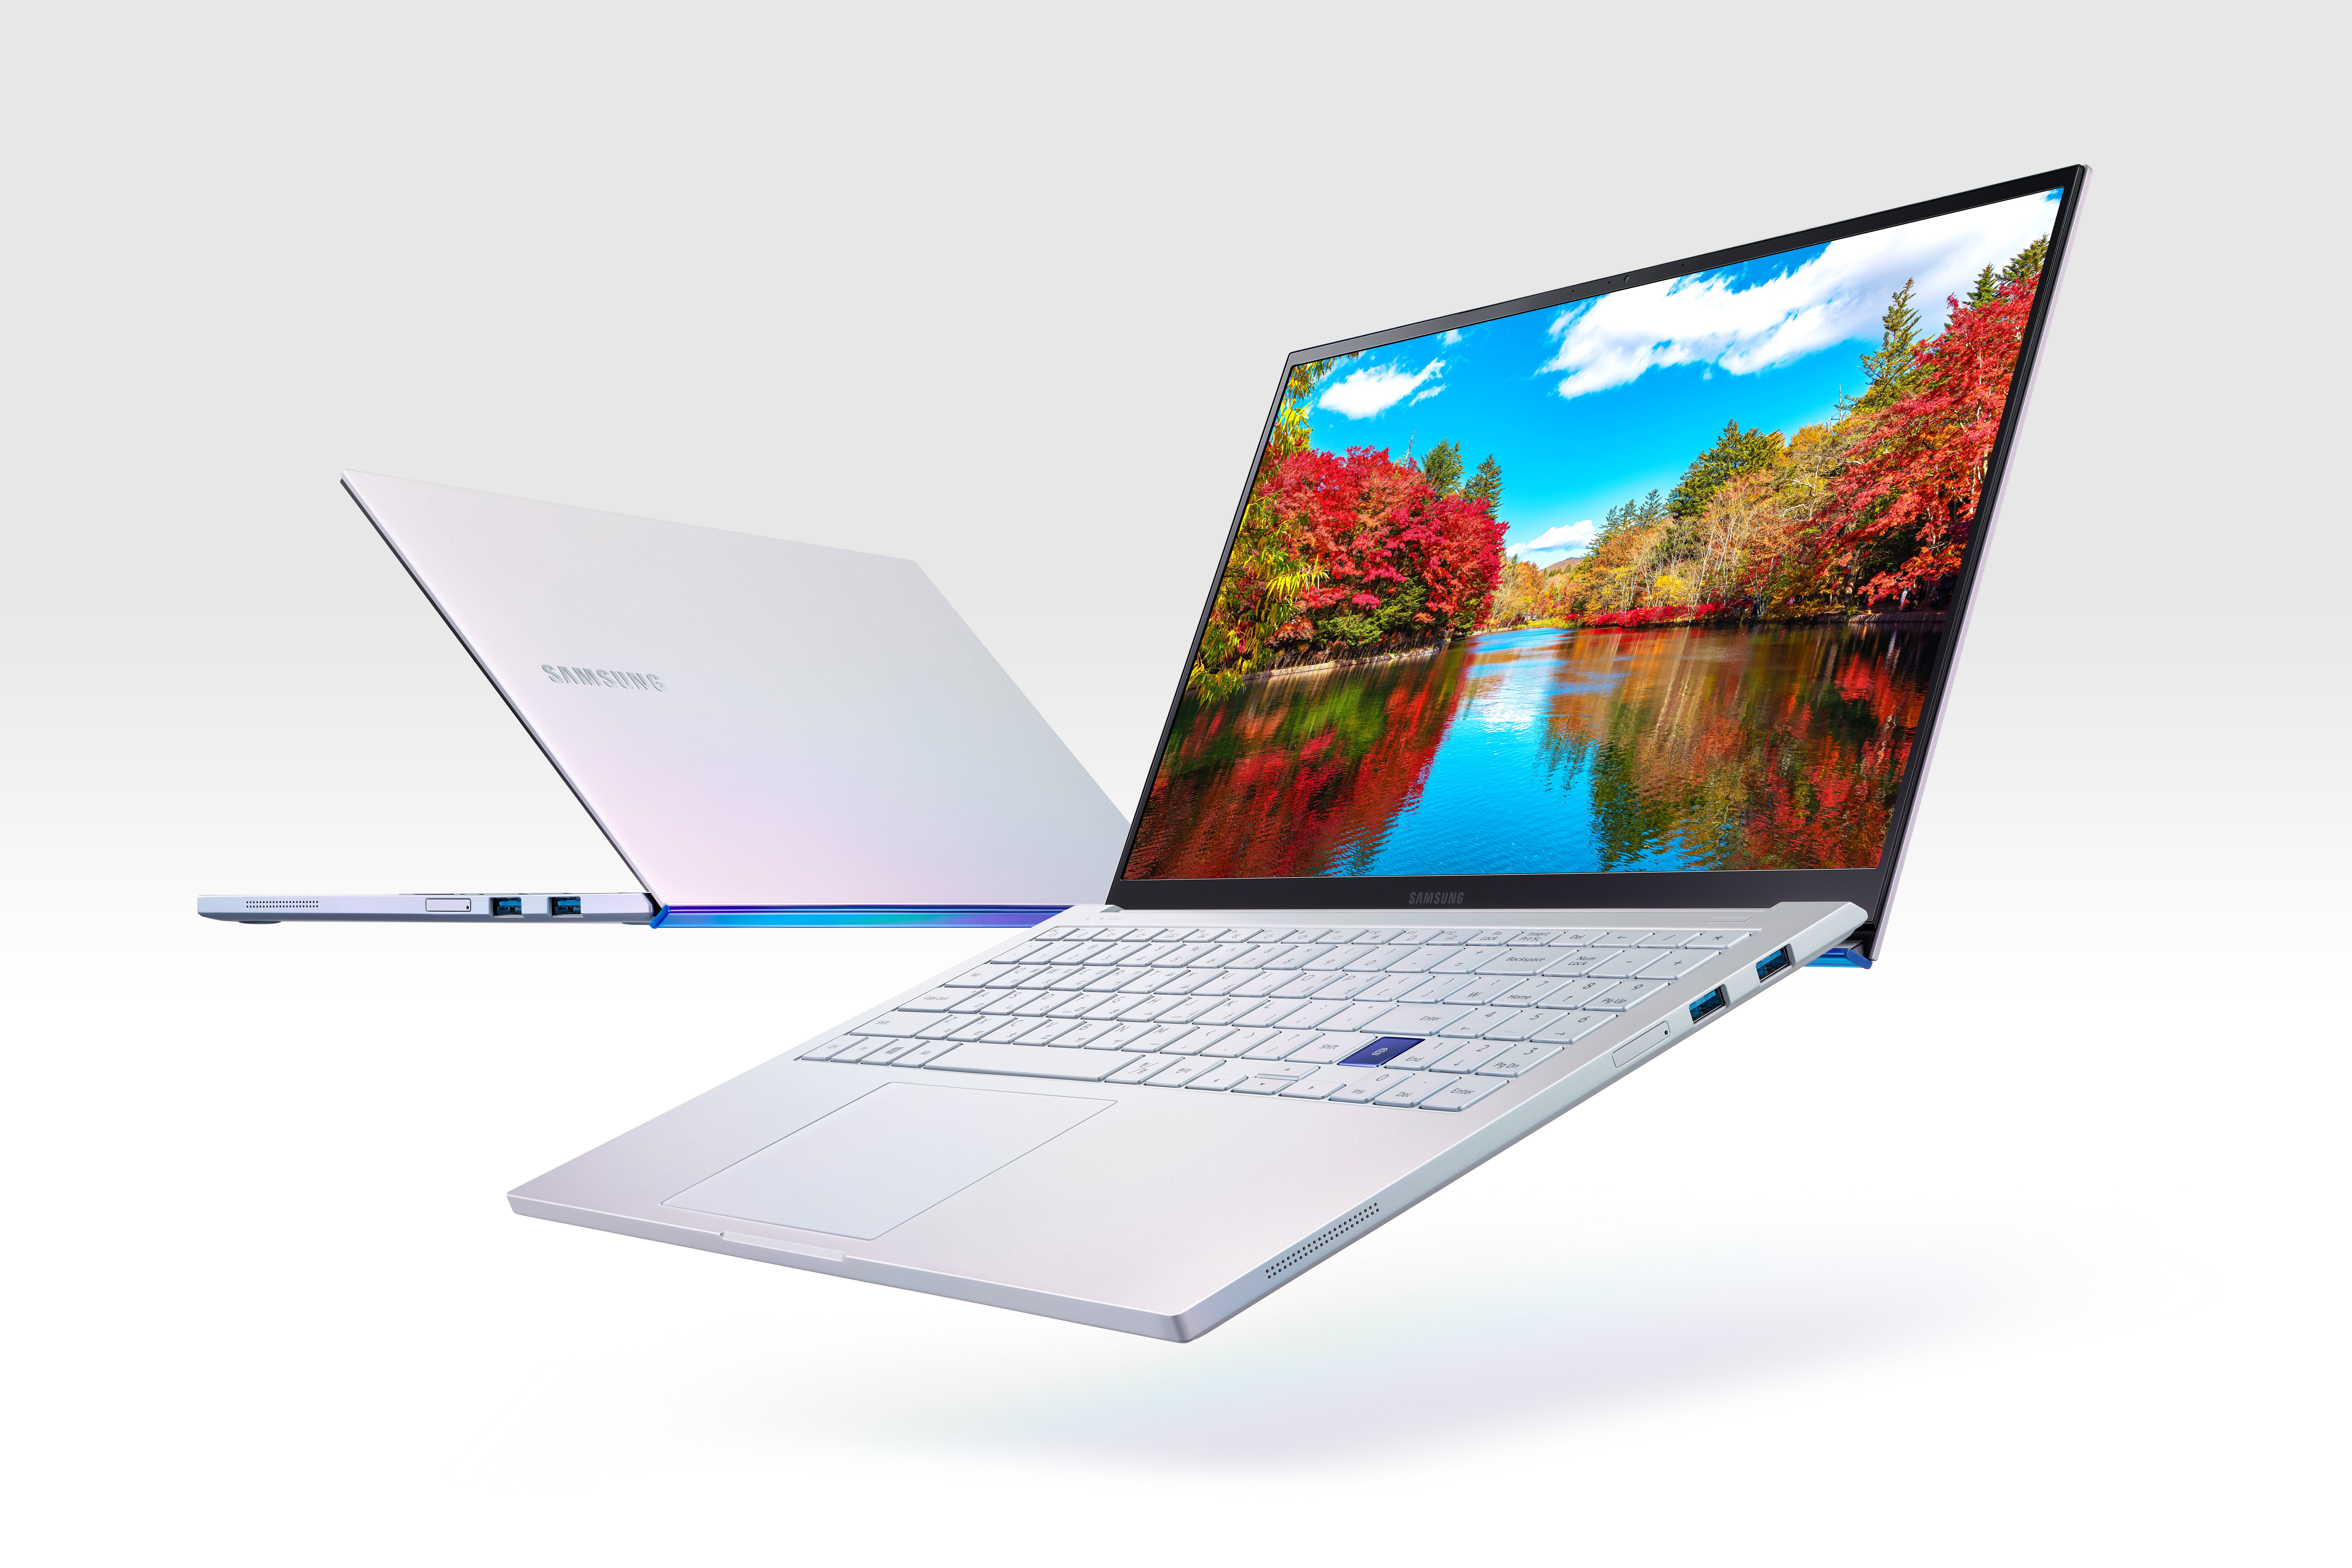 Samsung Finally Launches Galaxy Laptops In The Uk Spelling Trouble For Apple And Dell Trusted Reviews